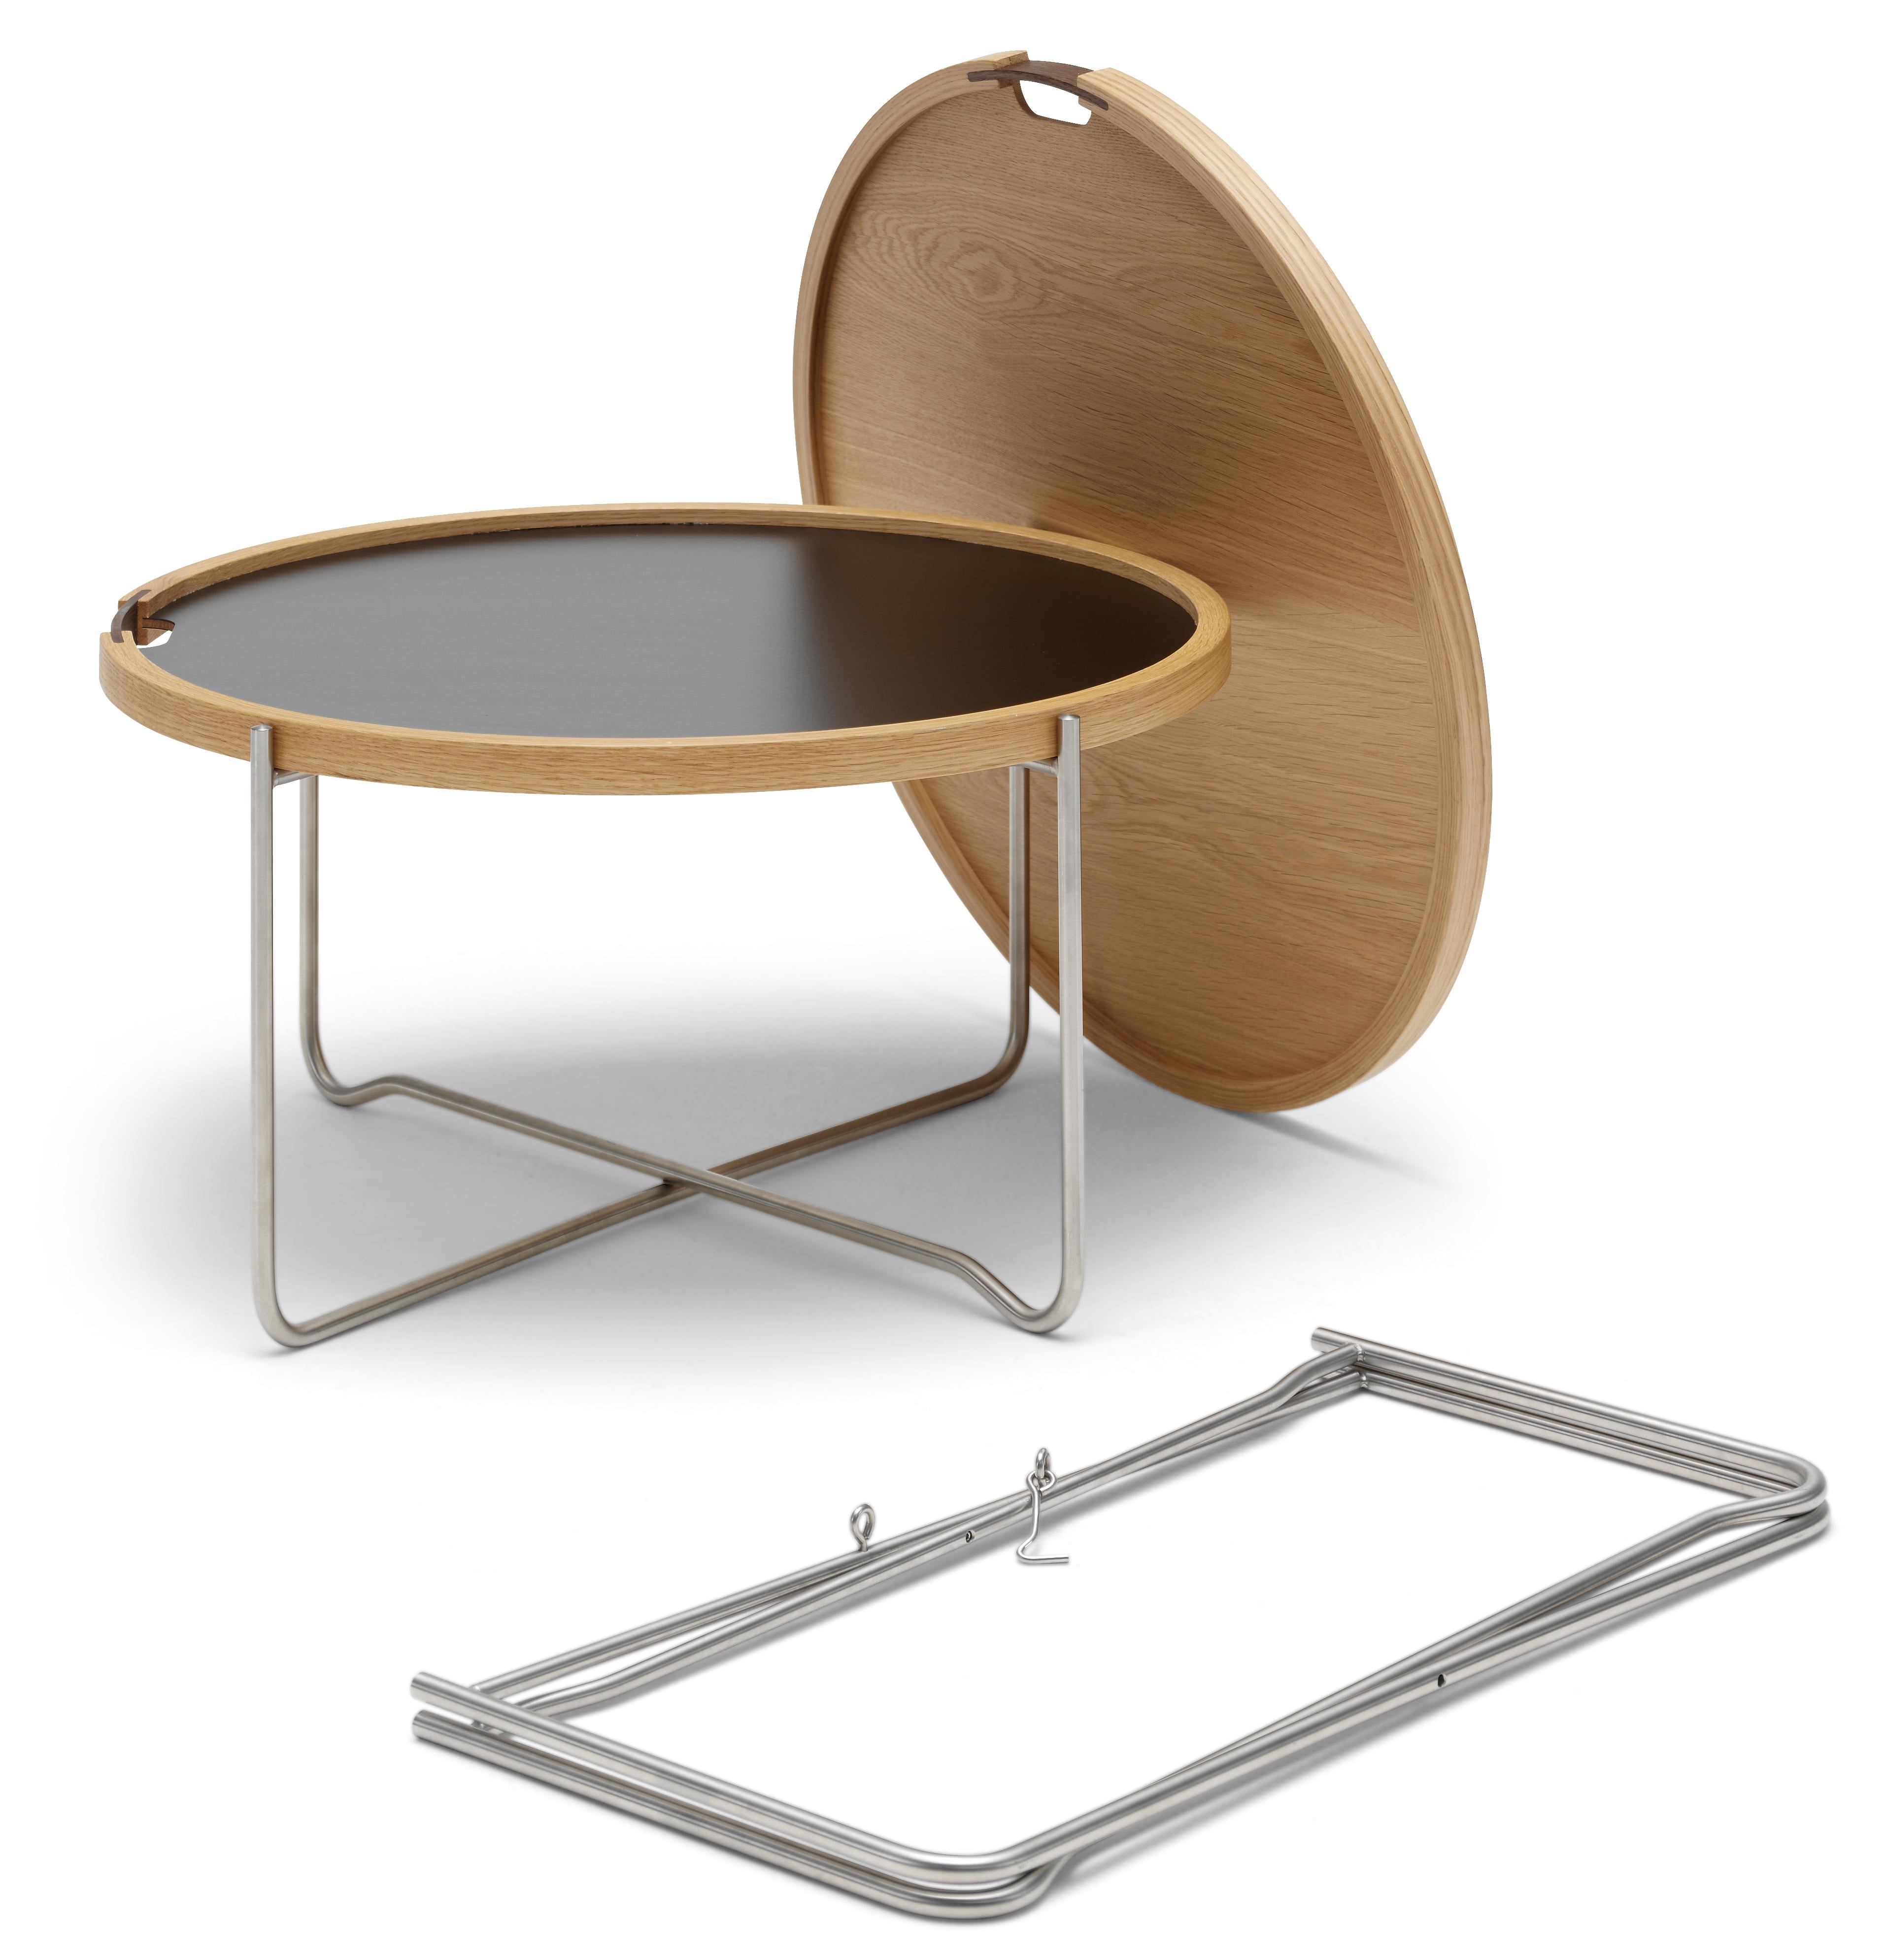 Modern CH417 Reversible Tray Table in Black and White Laminate by Hans J. Wegner